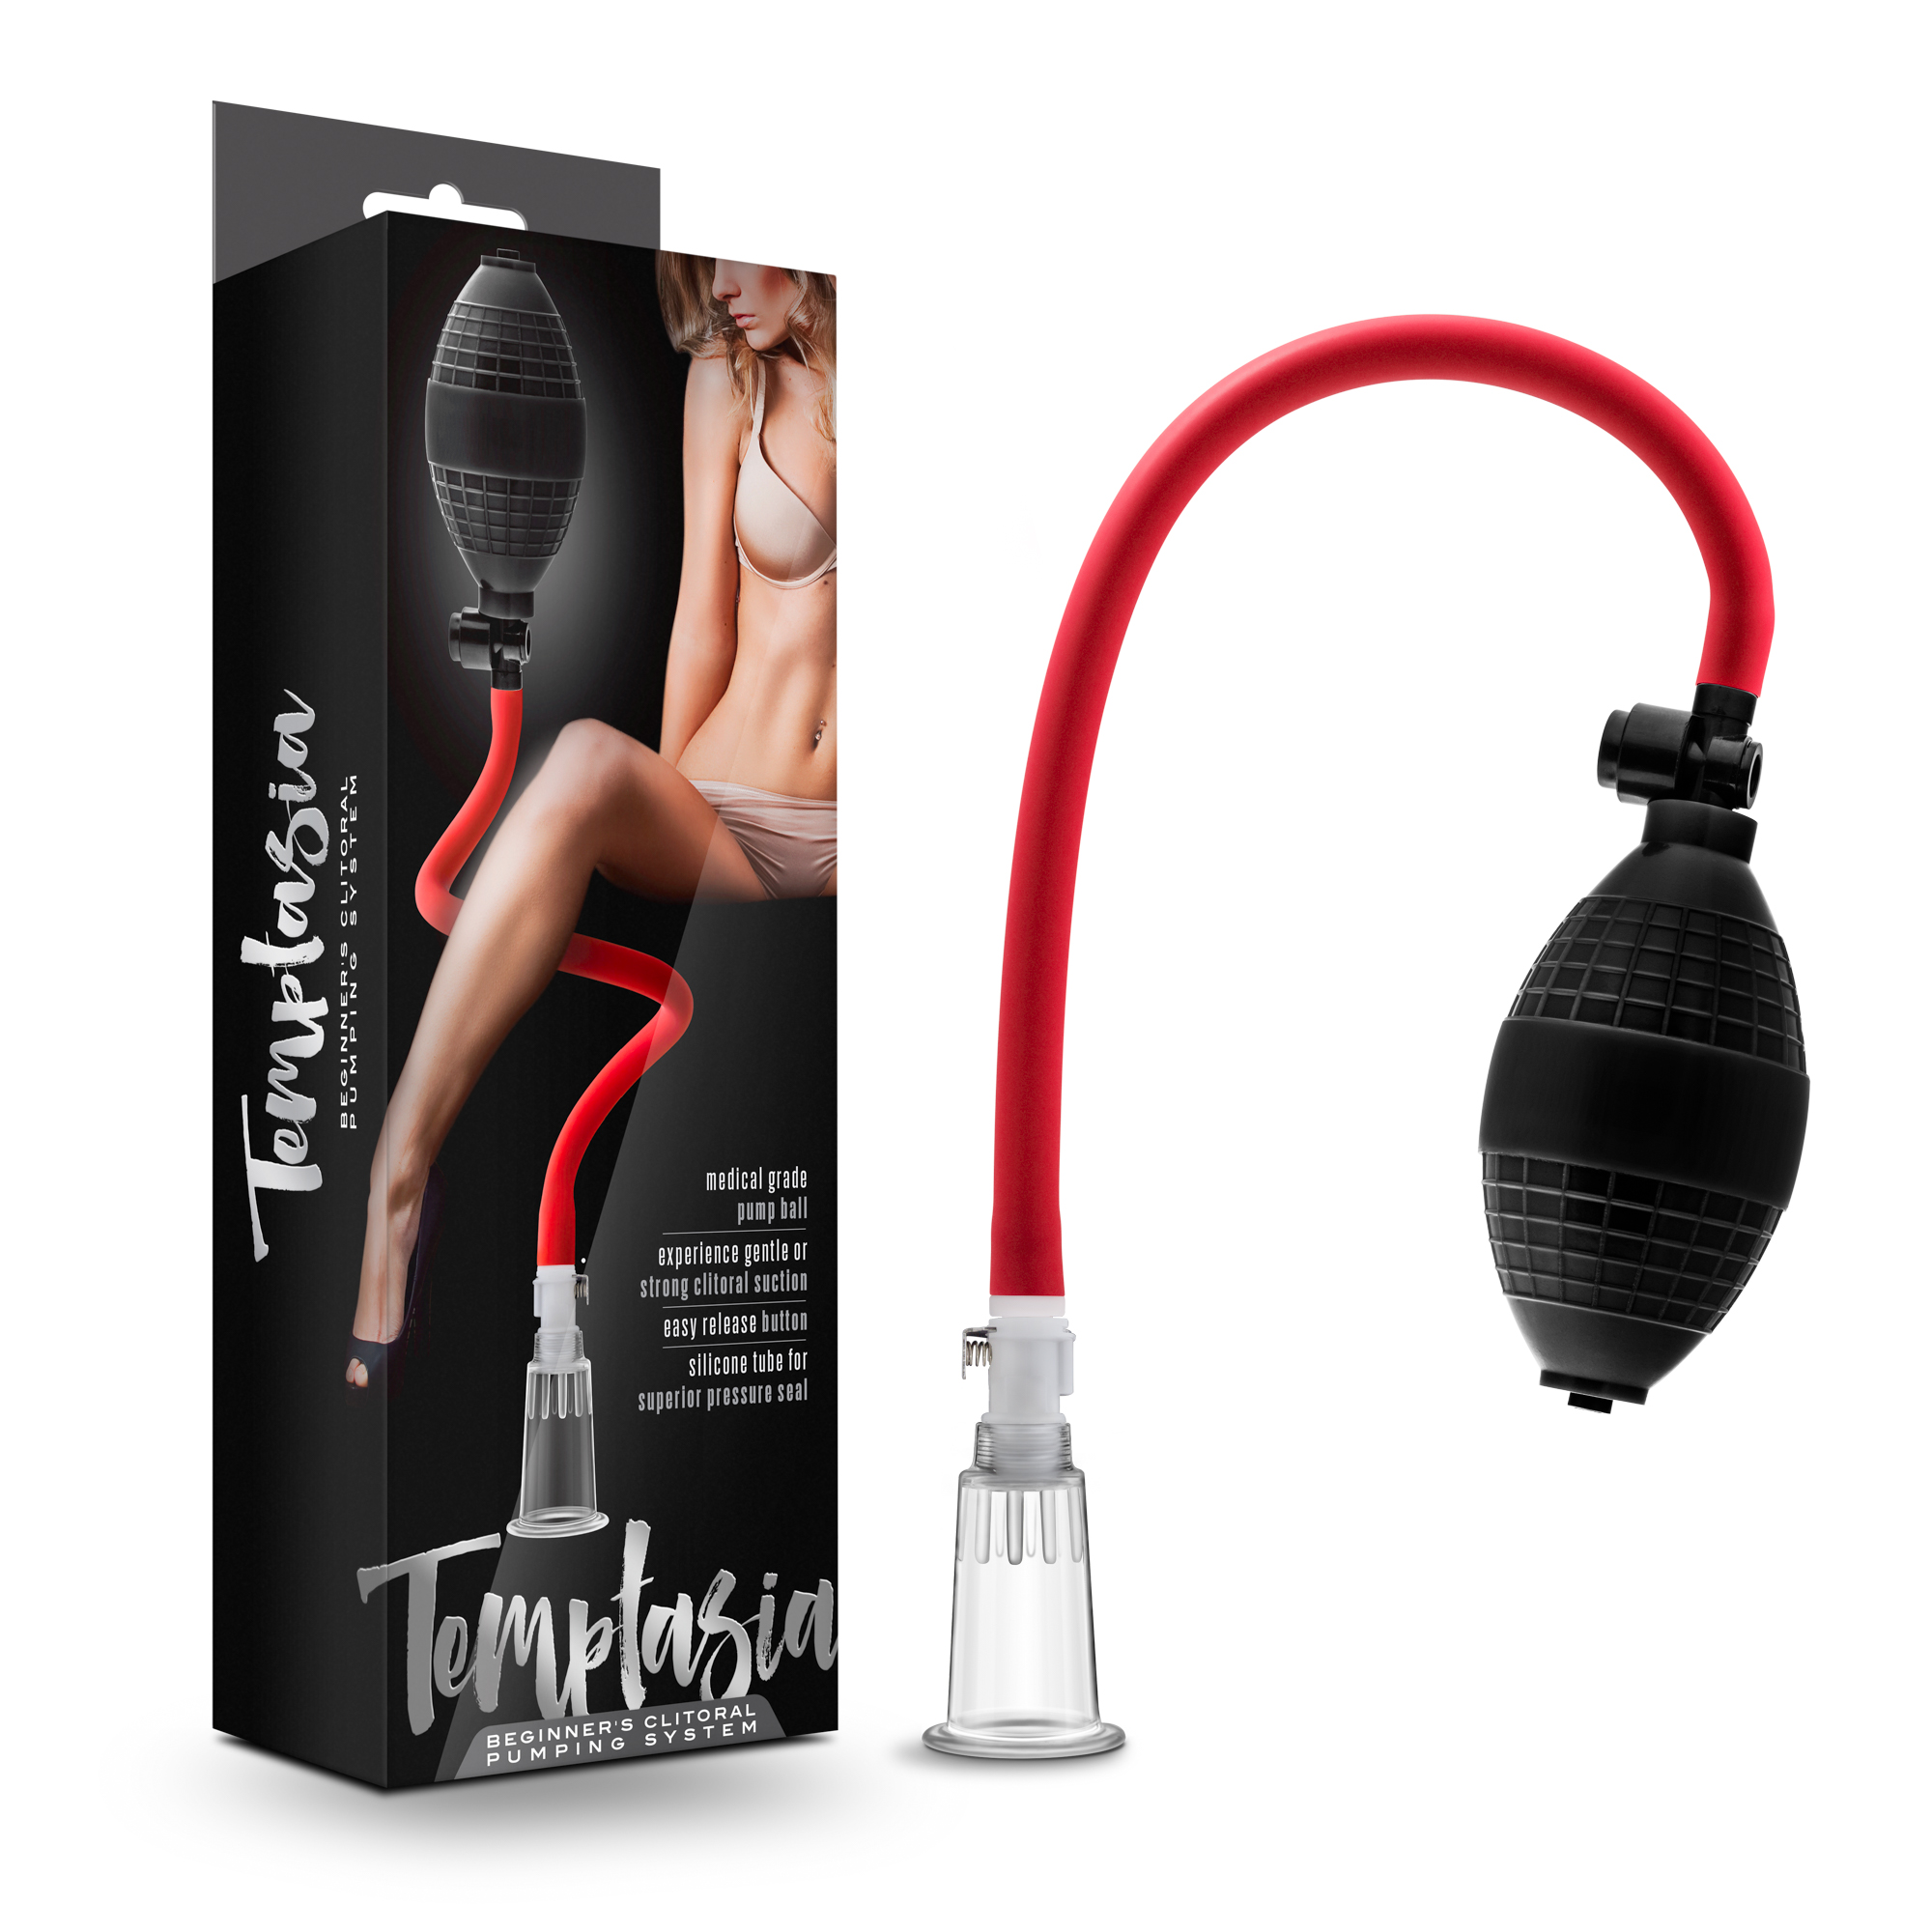 temptasia beginners clitoral pumping system 